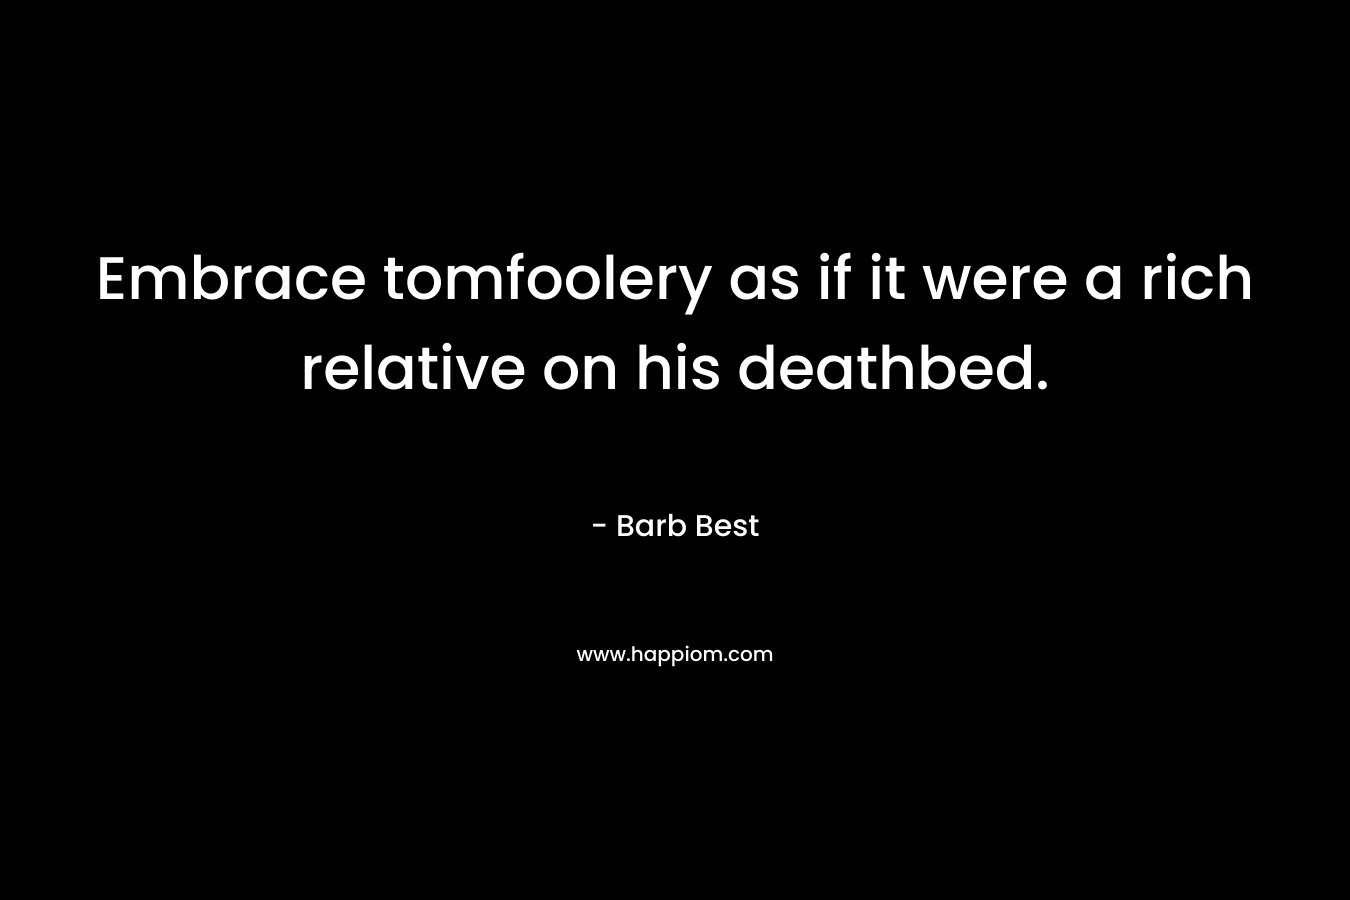 Embrace tomfoolery as if it were a rich relative on his deathbed. – Barb Best